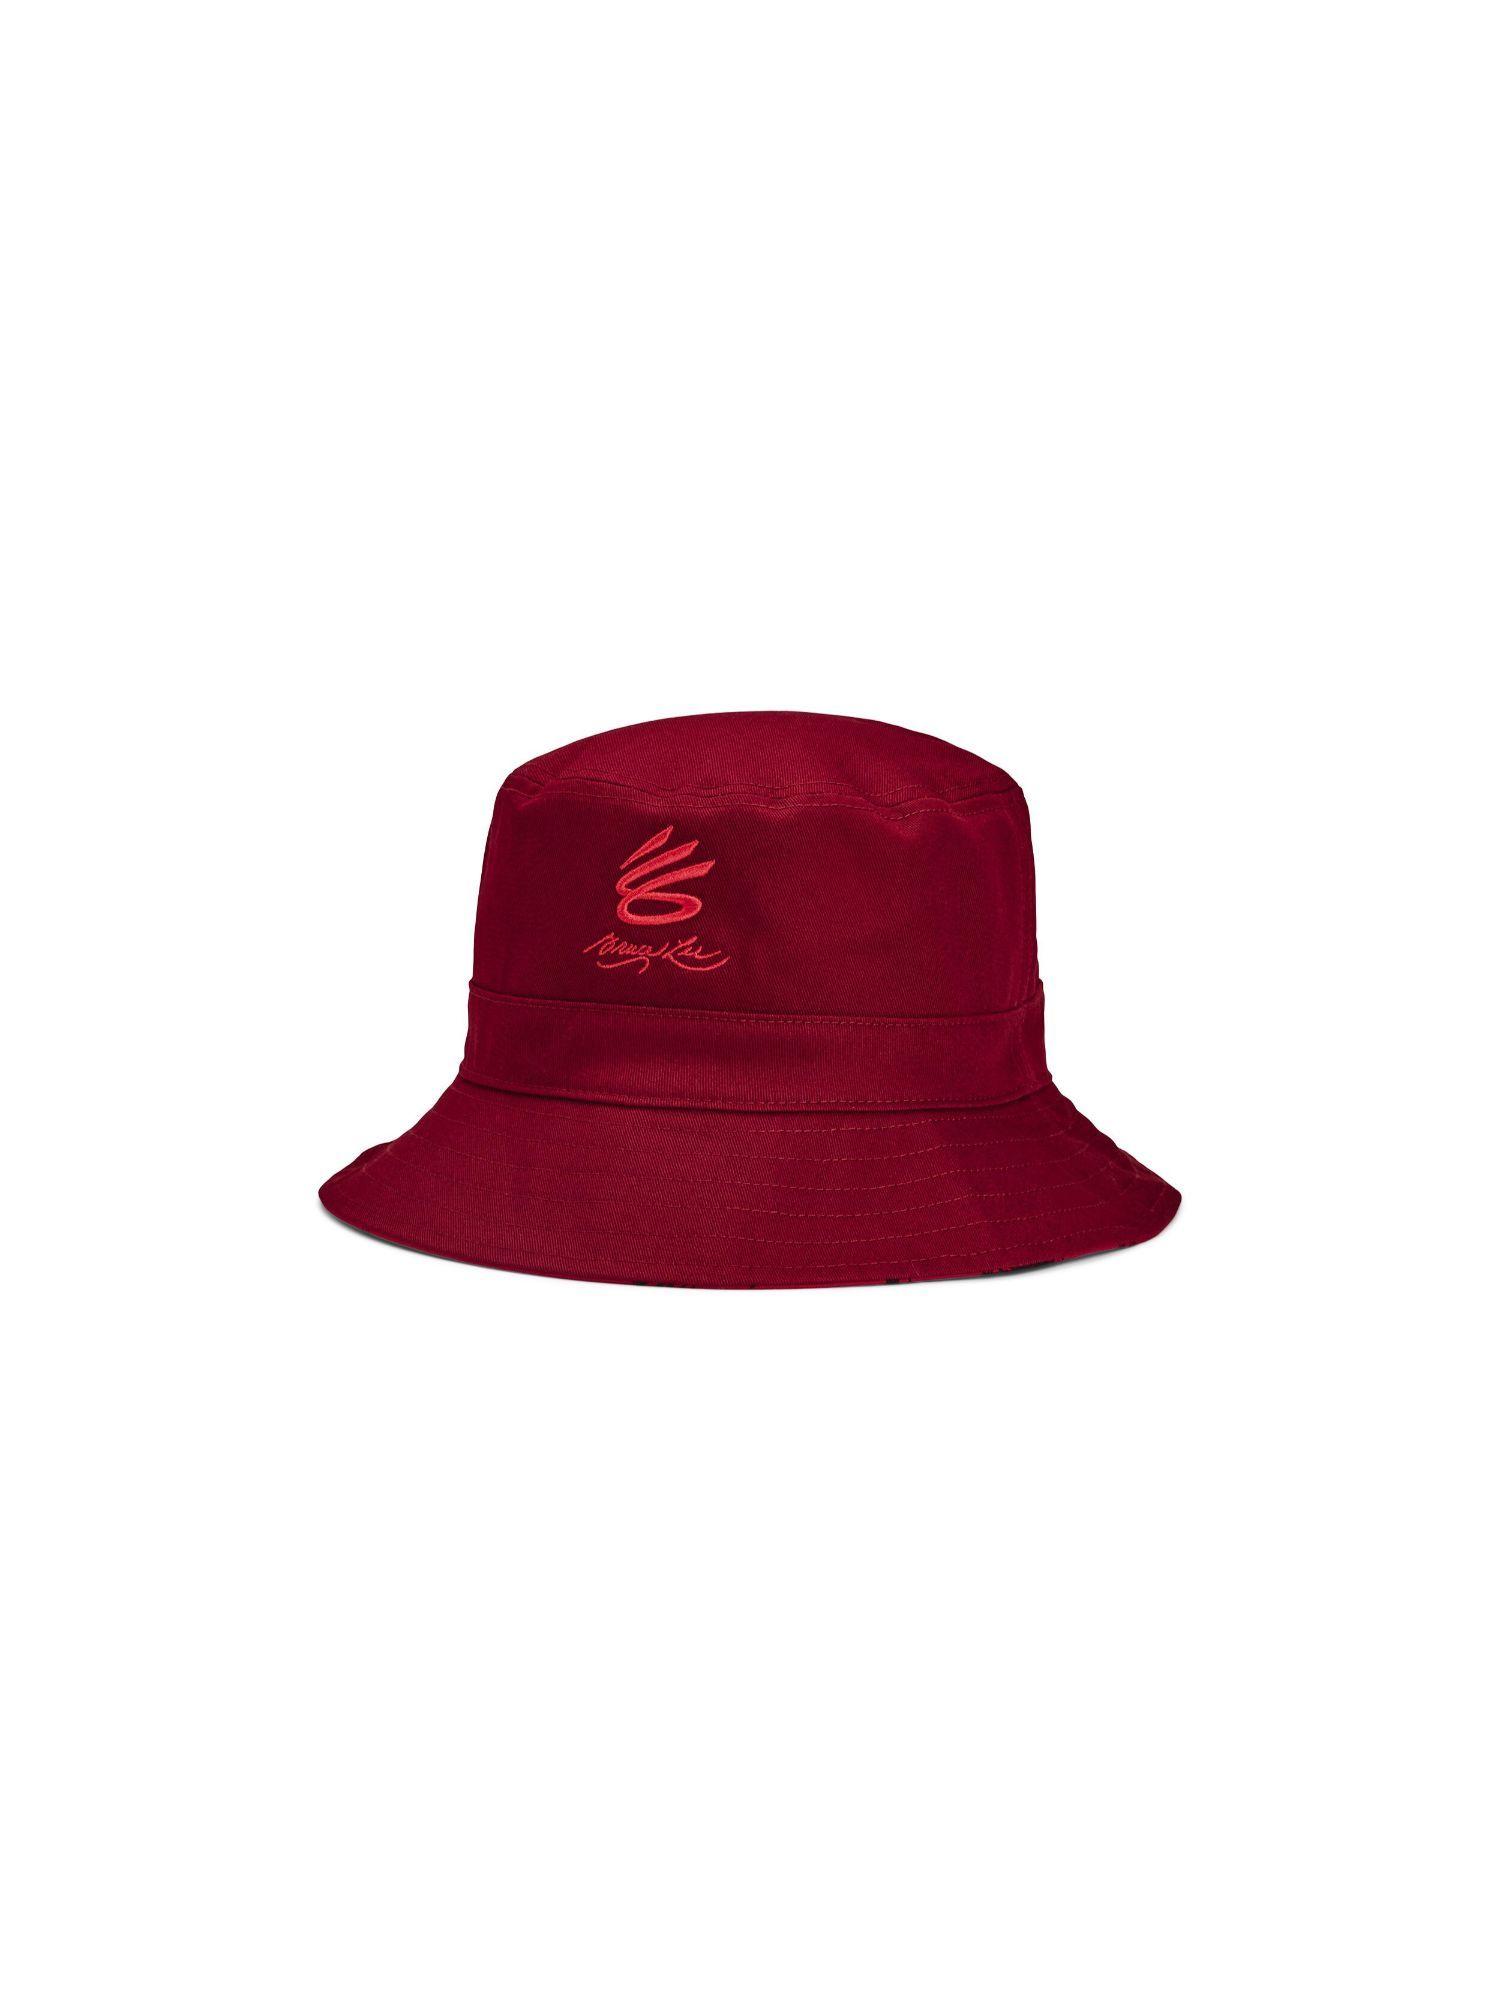 unisex curry x bruce lee bucket hat - red